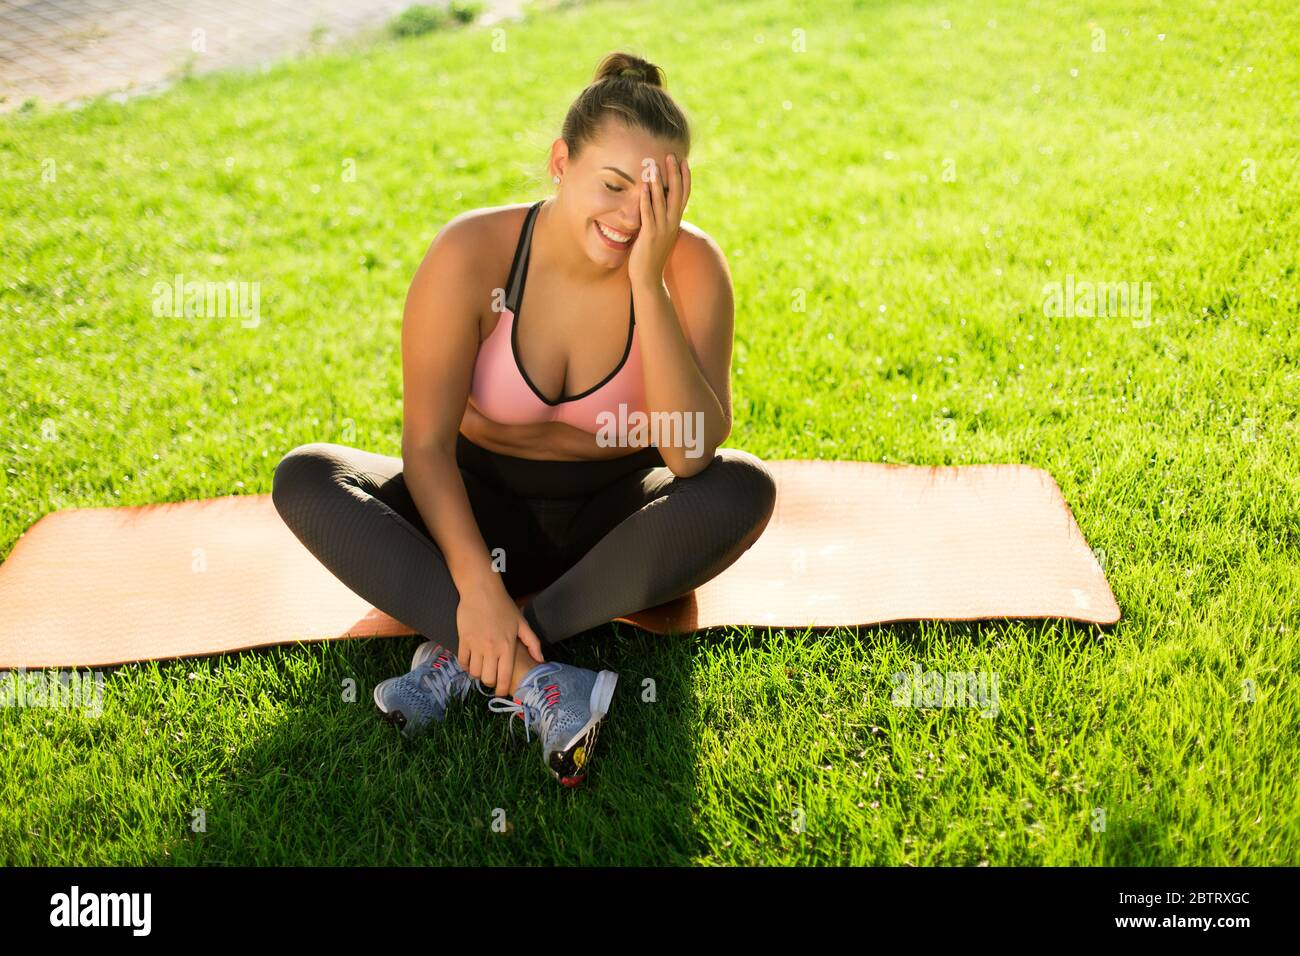 Plus Size Young Woman at City, Lifestyle Stock Photo - Image of large,  grass: 193100684